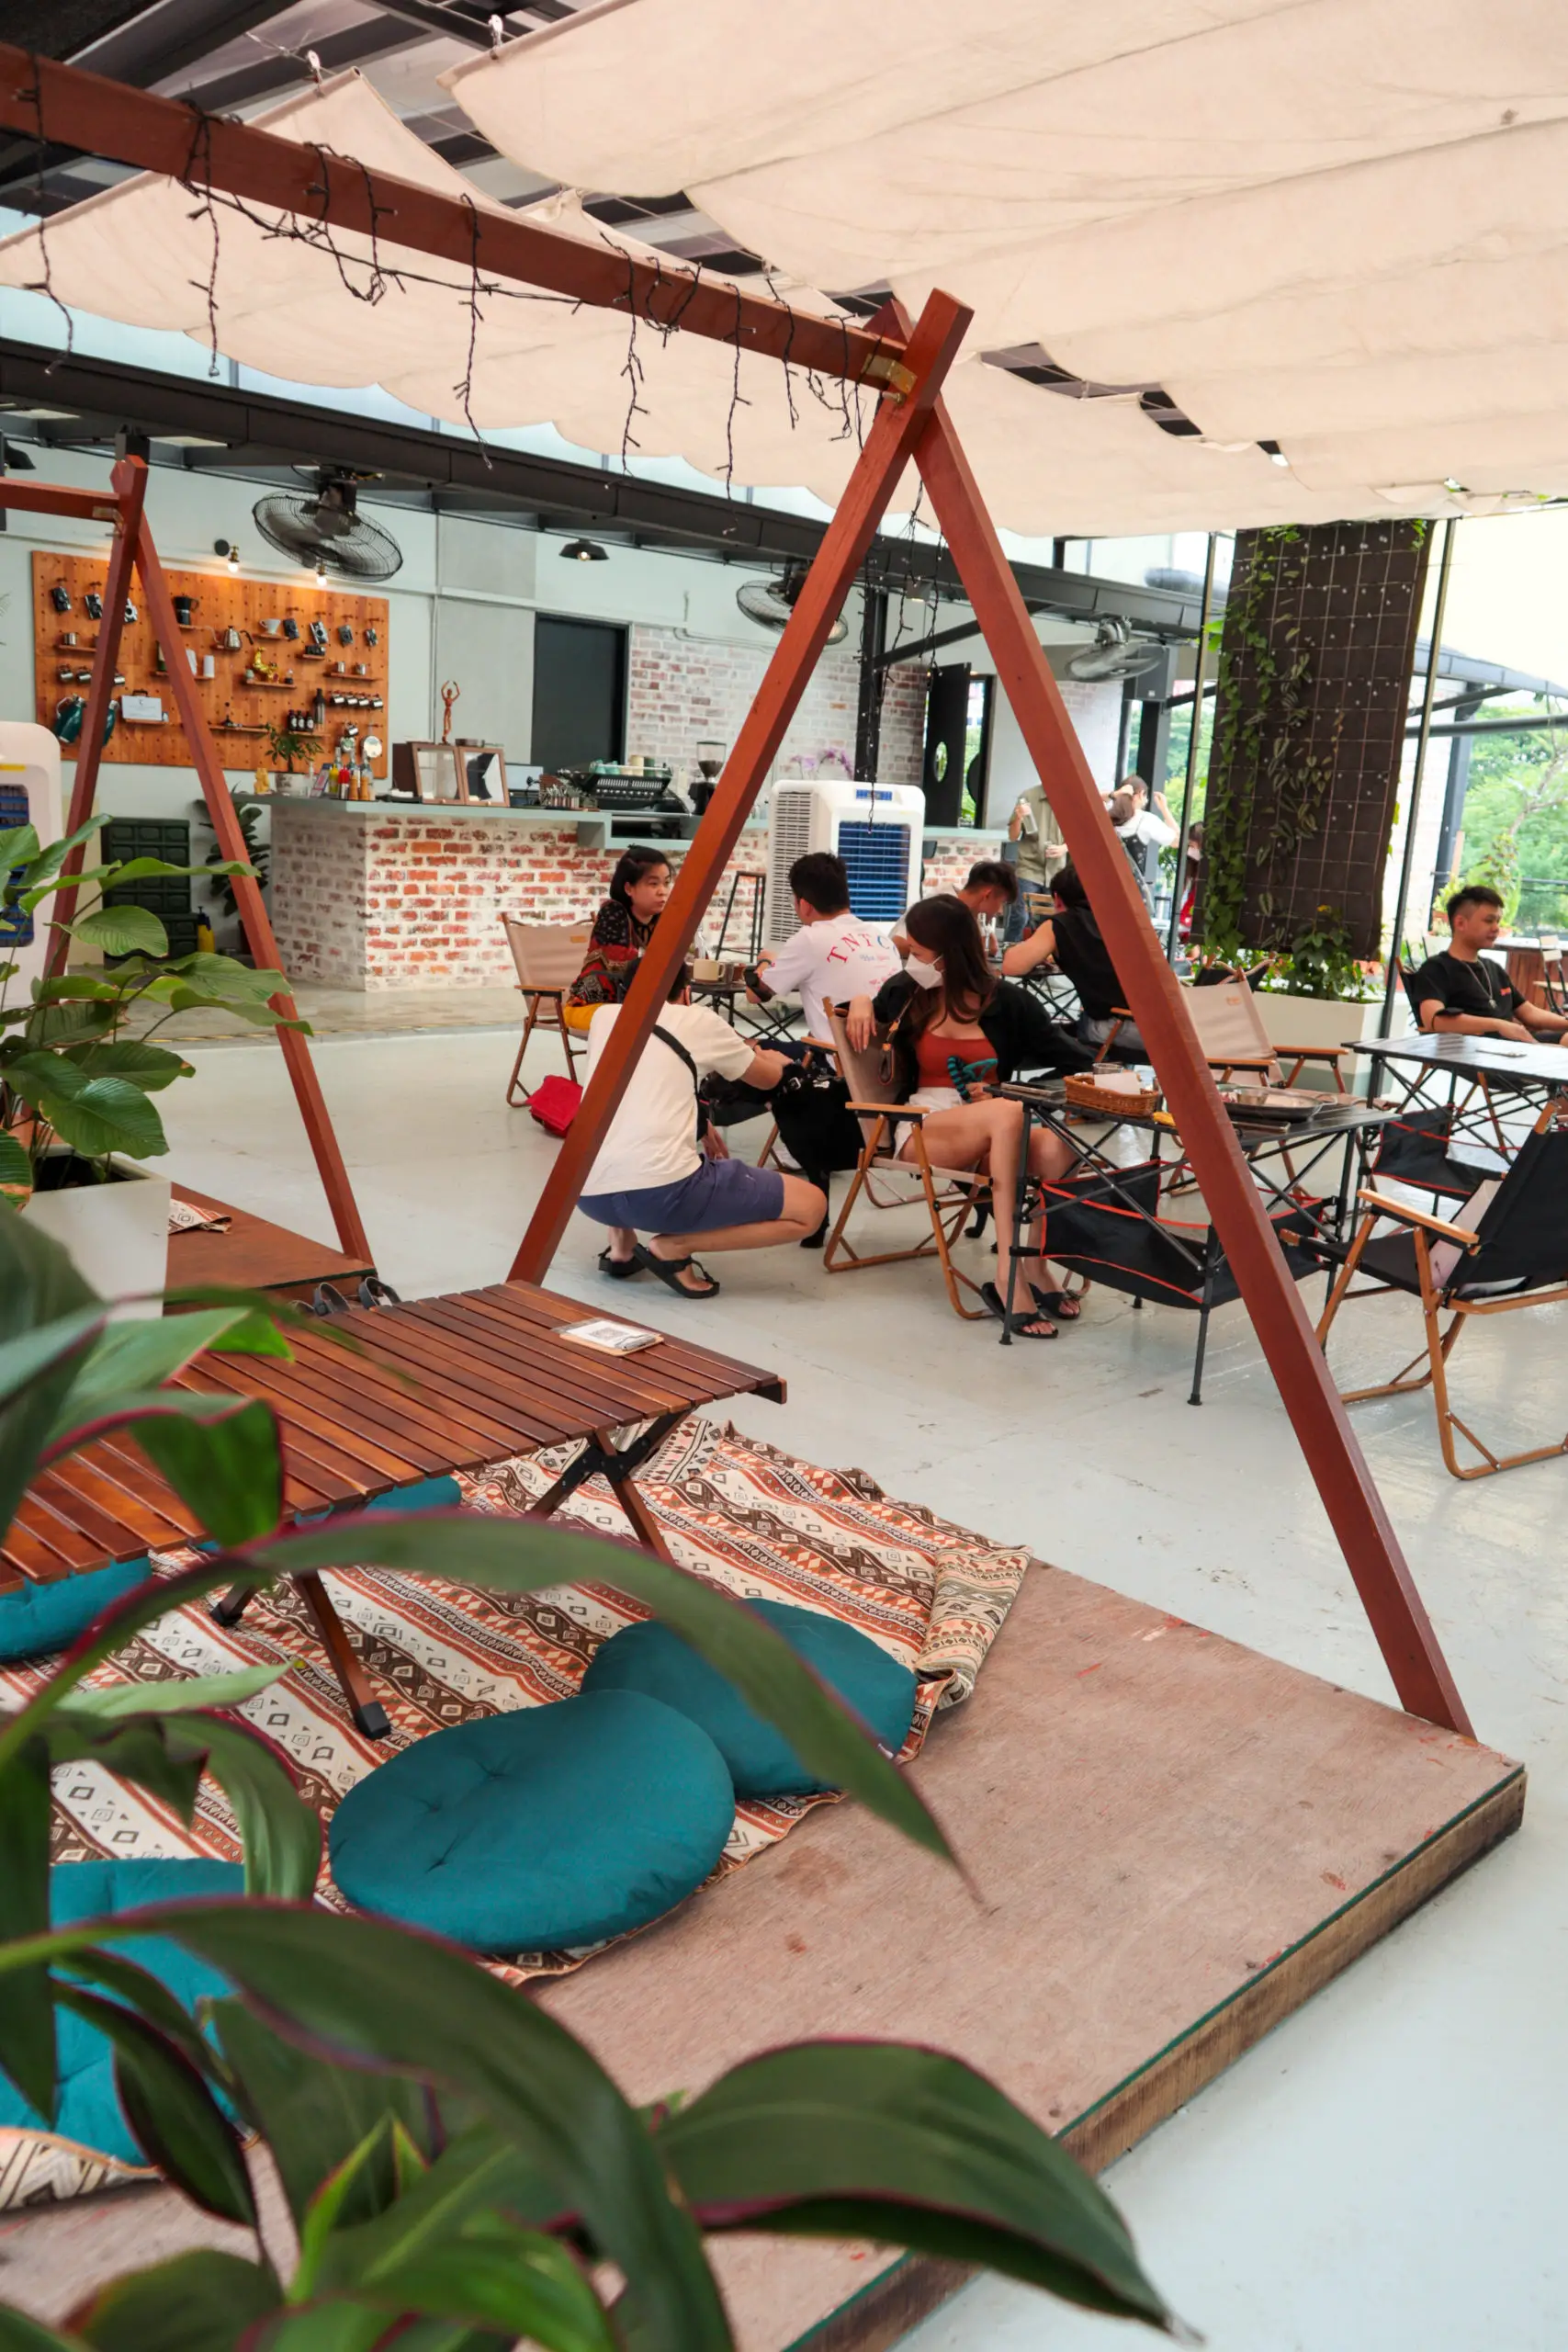 We checked out this lovely cafe-bar located on the rooftop of The Row KL. It’s quiet a cool spot - with its use of camping tarp shelter, chairs and other peripherals as decor. The cafe-bar is pet-friendly too - perfect for pet-daddies and mommies to bring their fur kids.